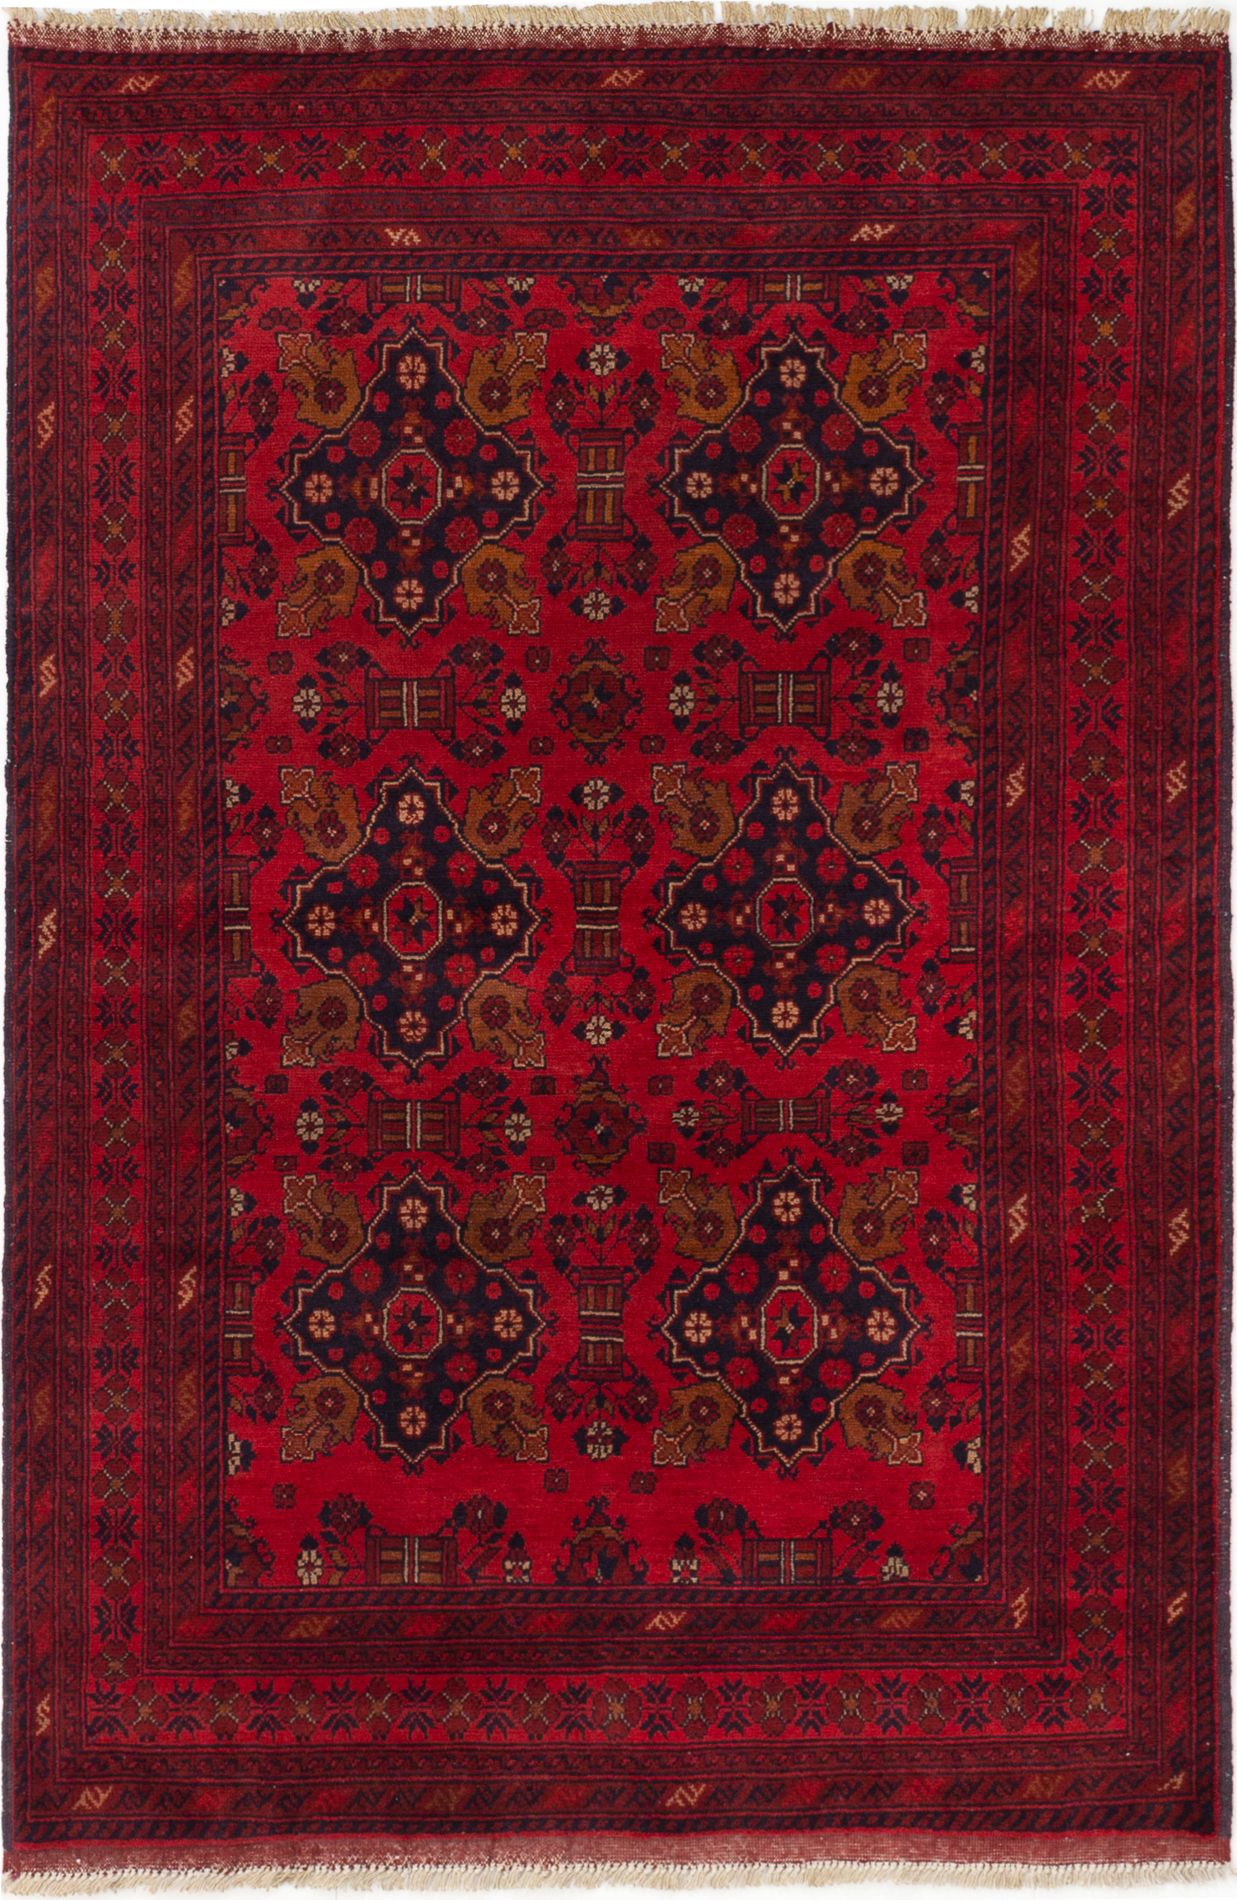 Hand-knotted Finest Khal Mohammadi Red Wool Rug 4'5" x 6'6"  Size: 4'5" x 6'6"  